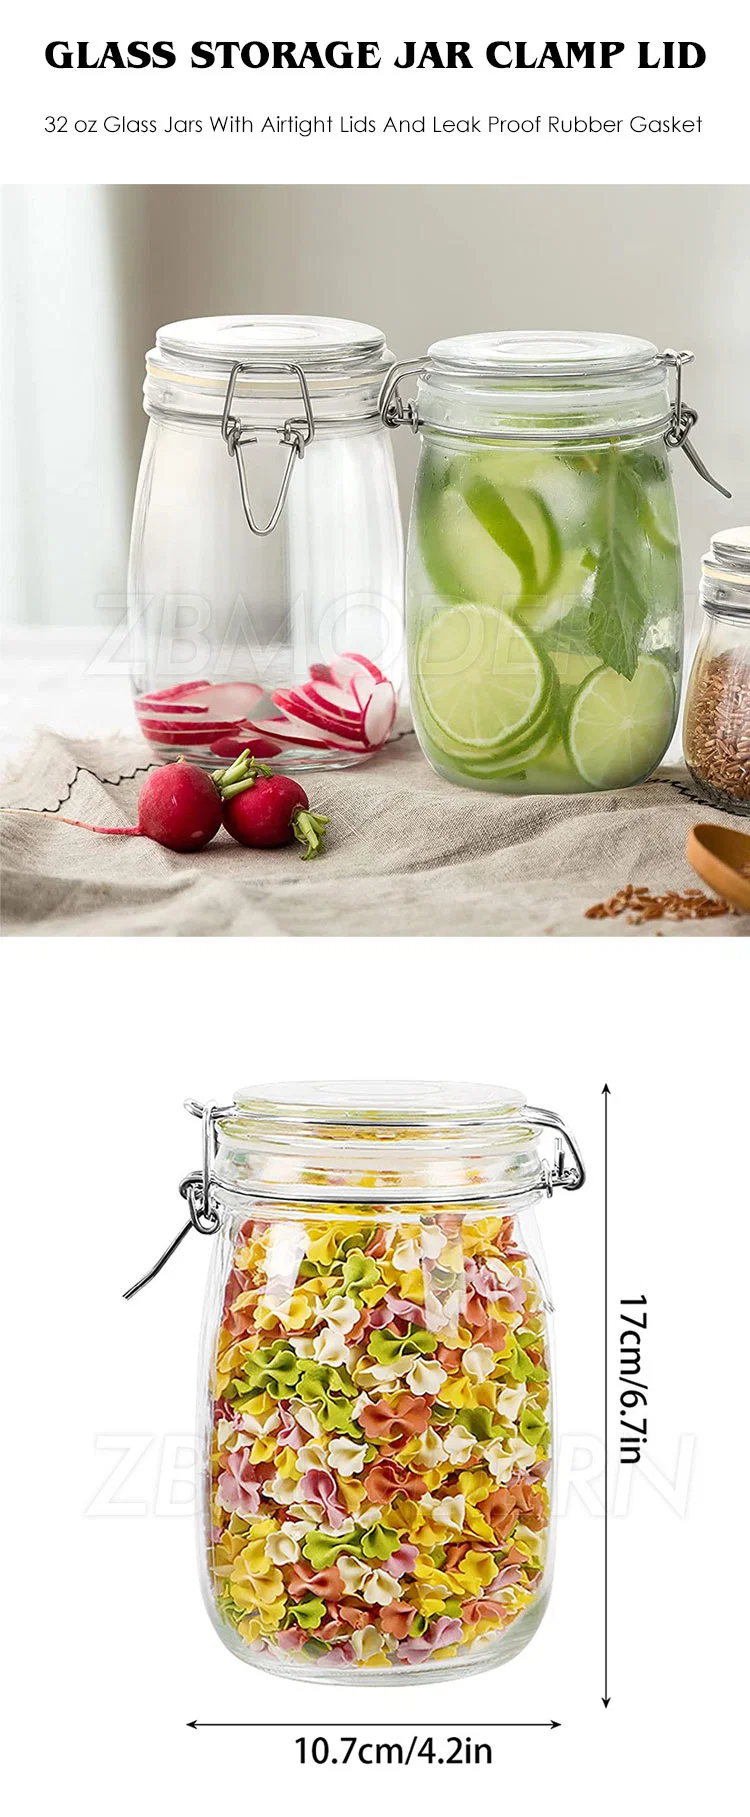 32oz Glass Jars with Airtight Lids, 4 Pack Glass Storage Jars with Clamp Lids, Kitchen Canister for Food and Pantry